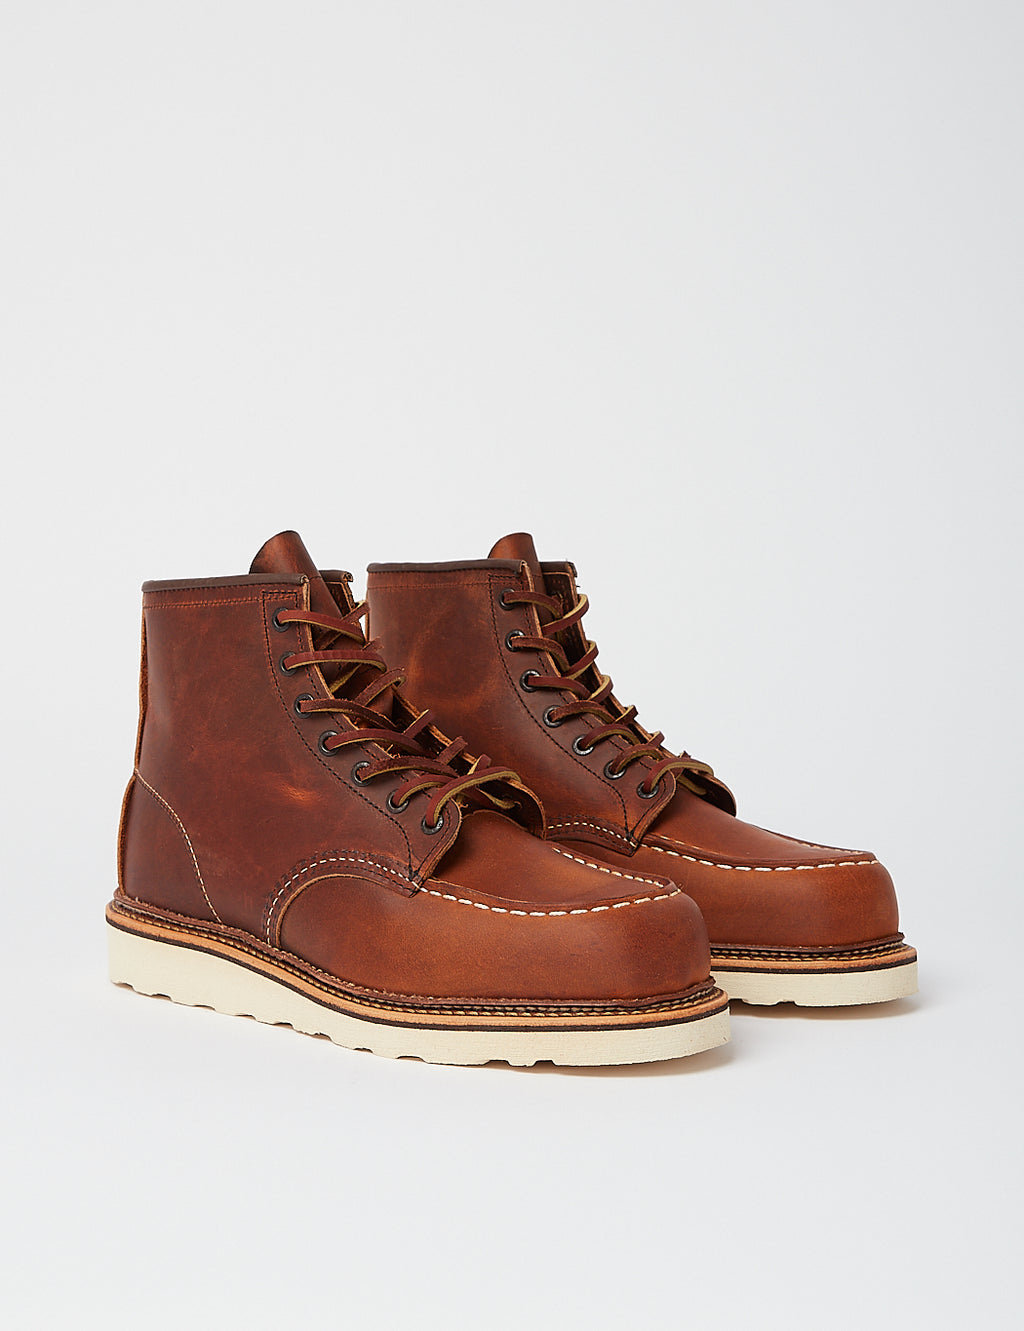 Red Wing Heritage 6